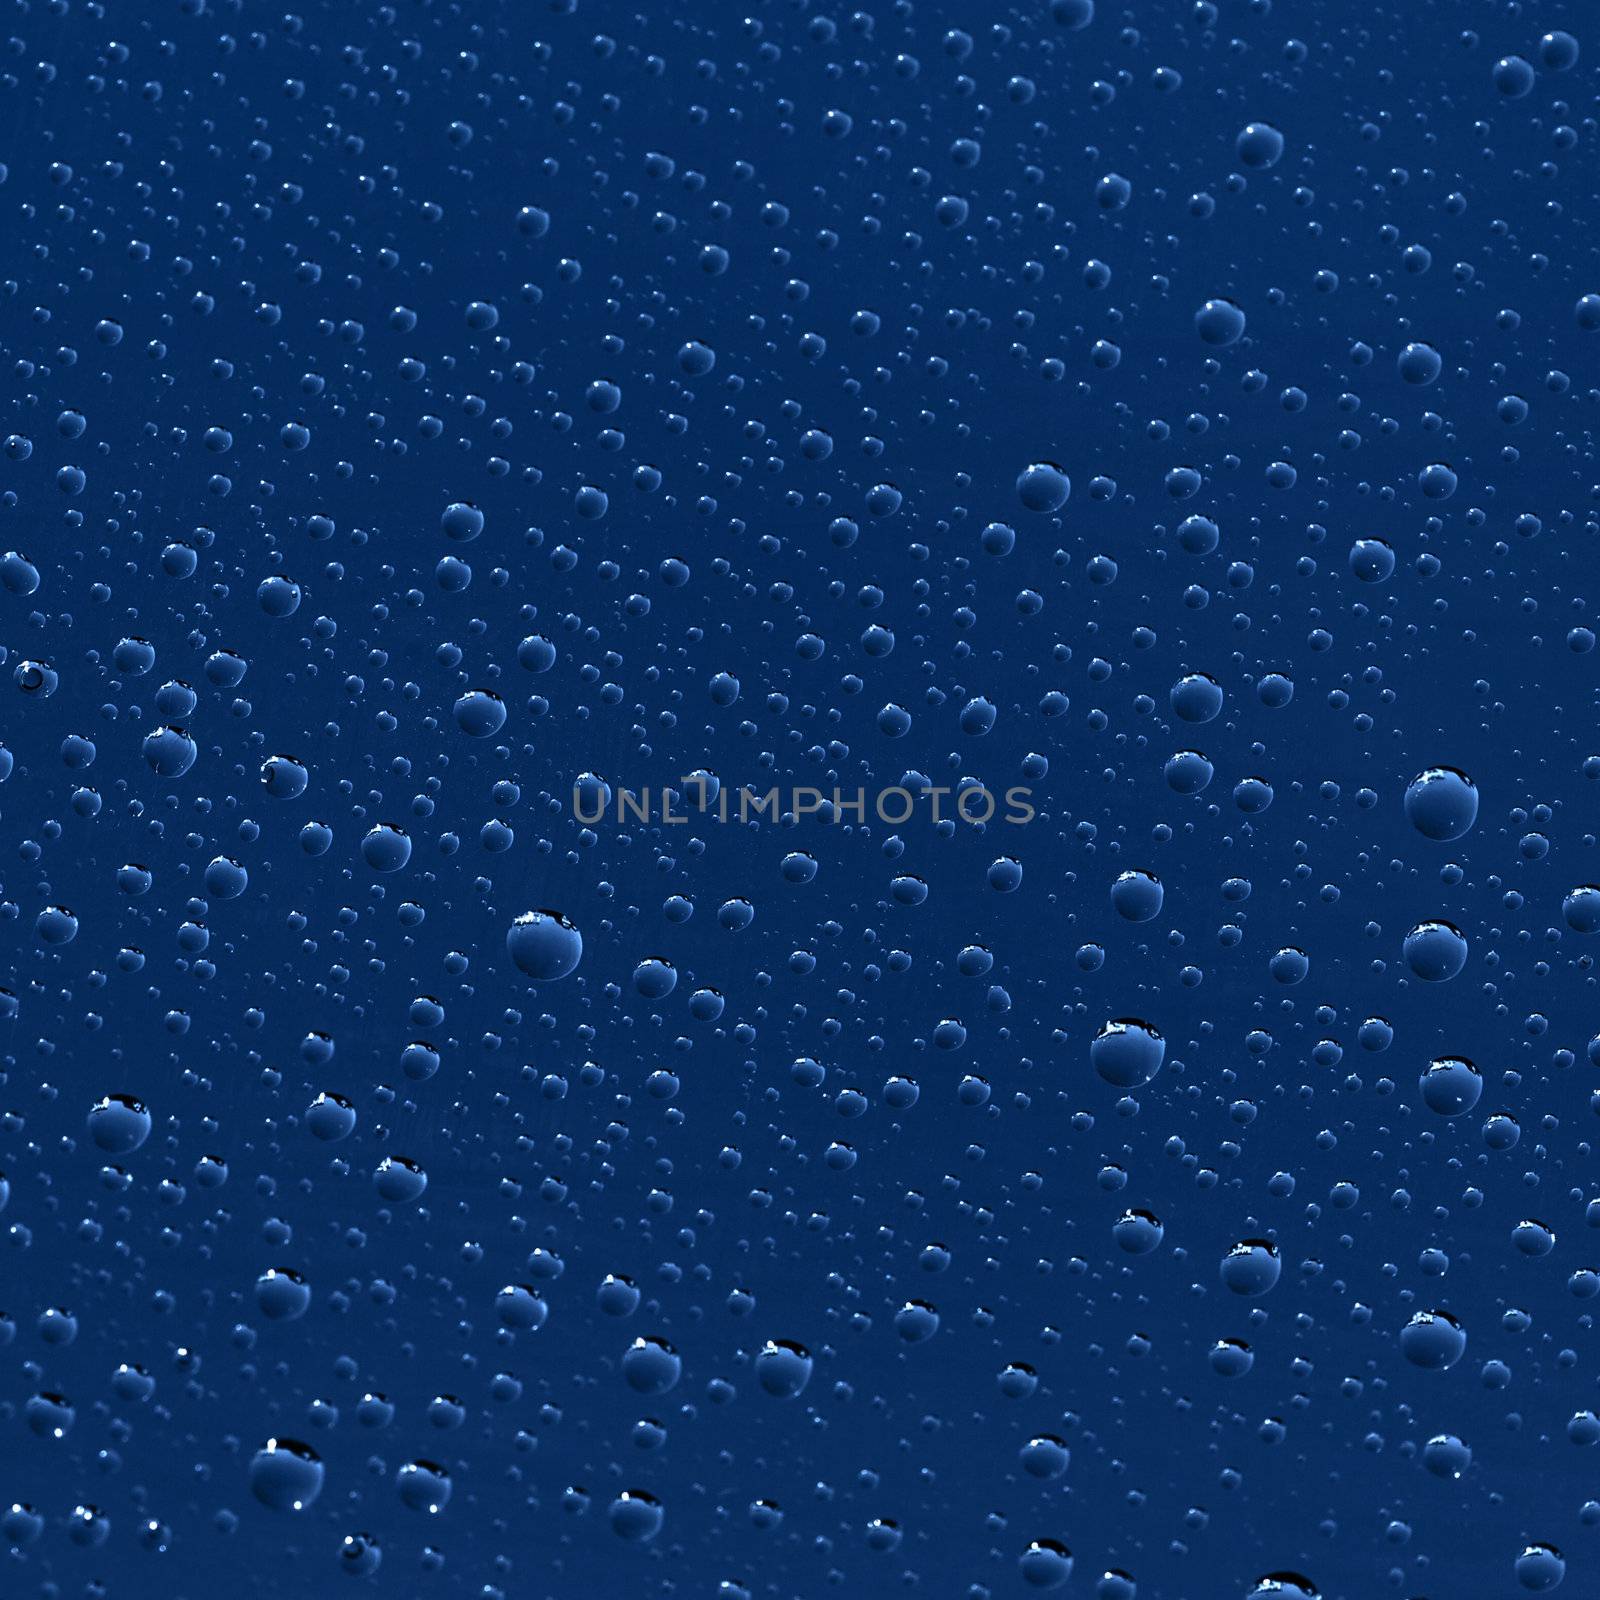 The texture - water drops on blue surface